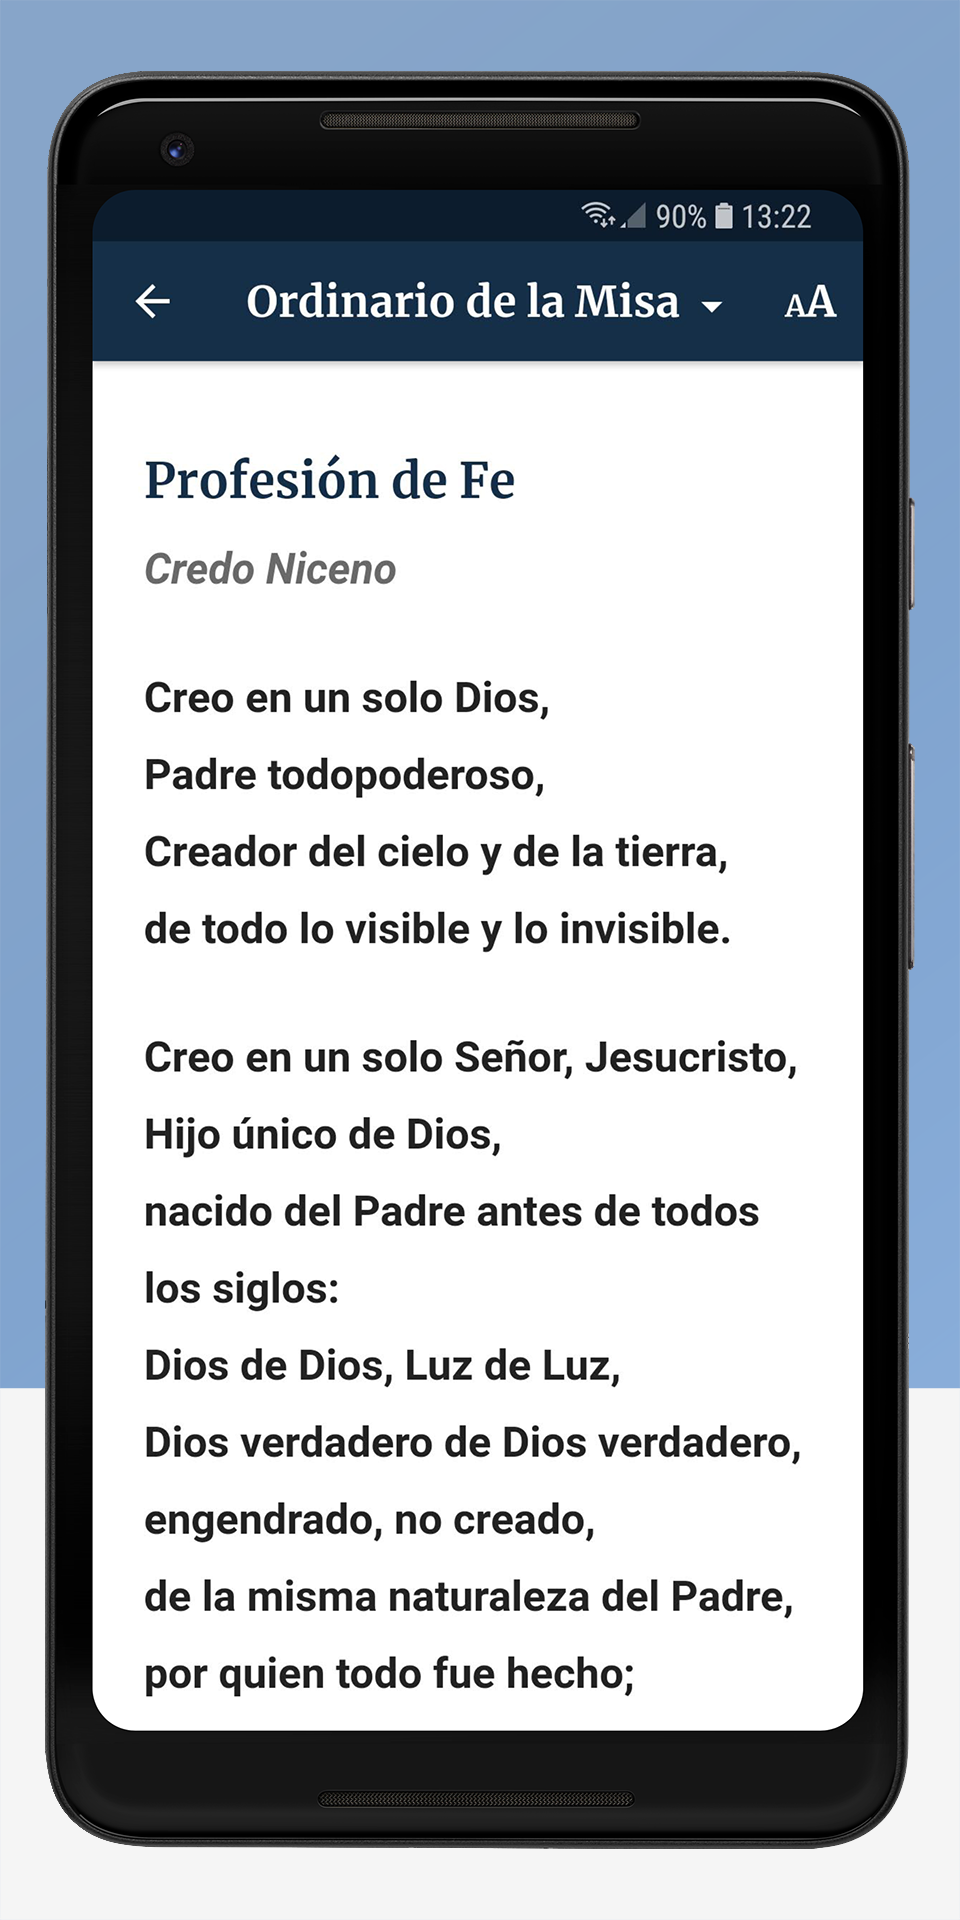 The Word Among Us Android App - Order of Mass Screen